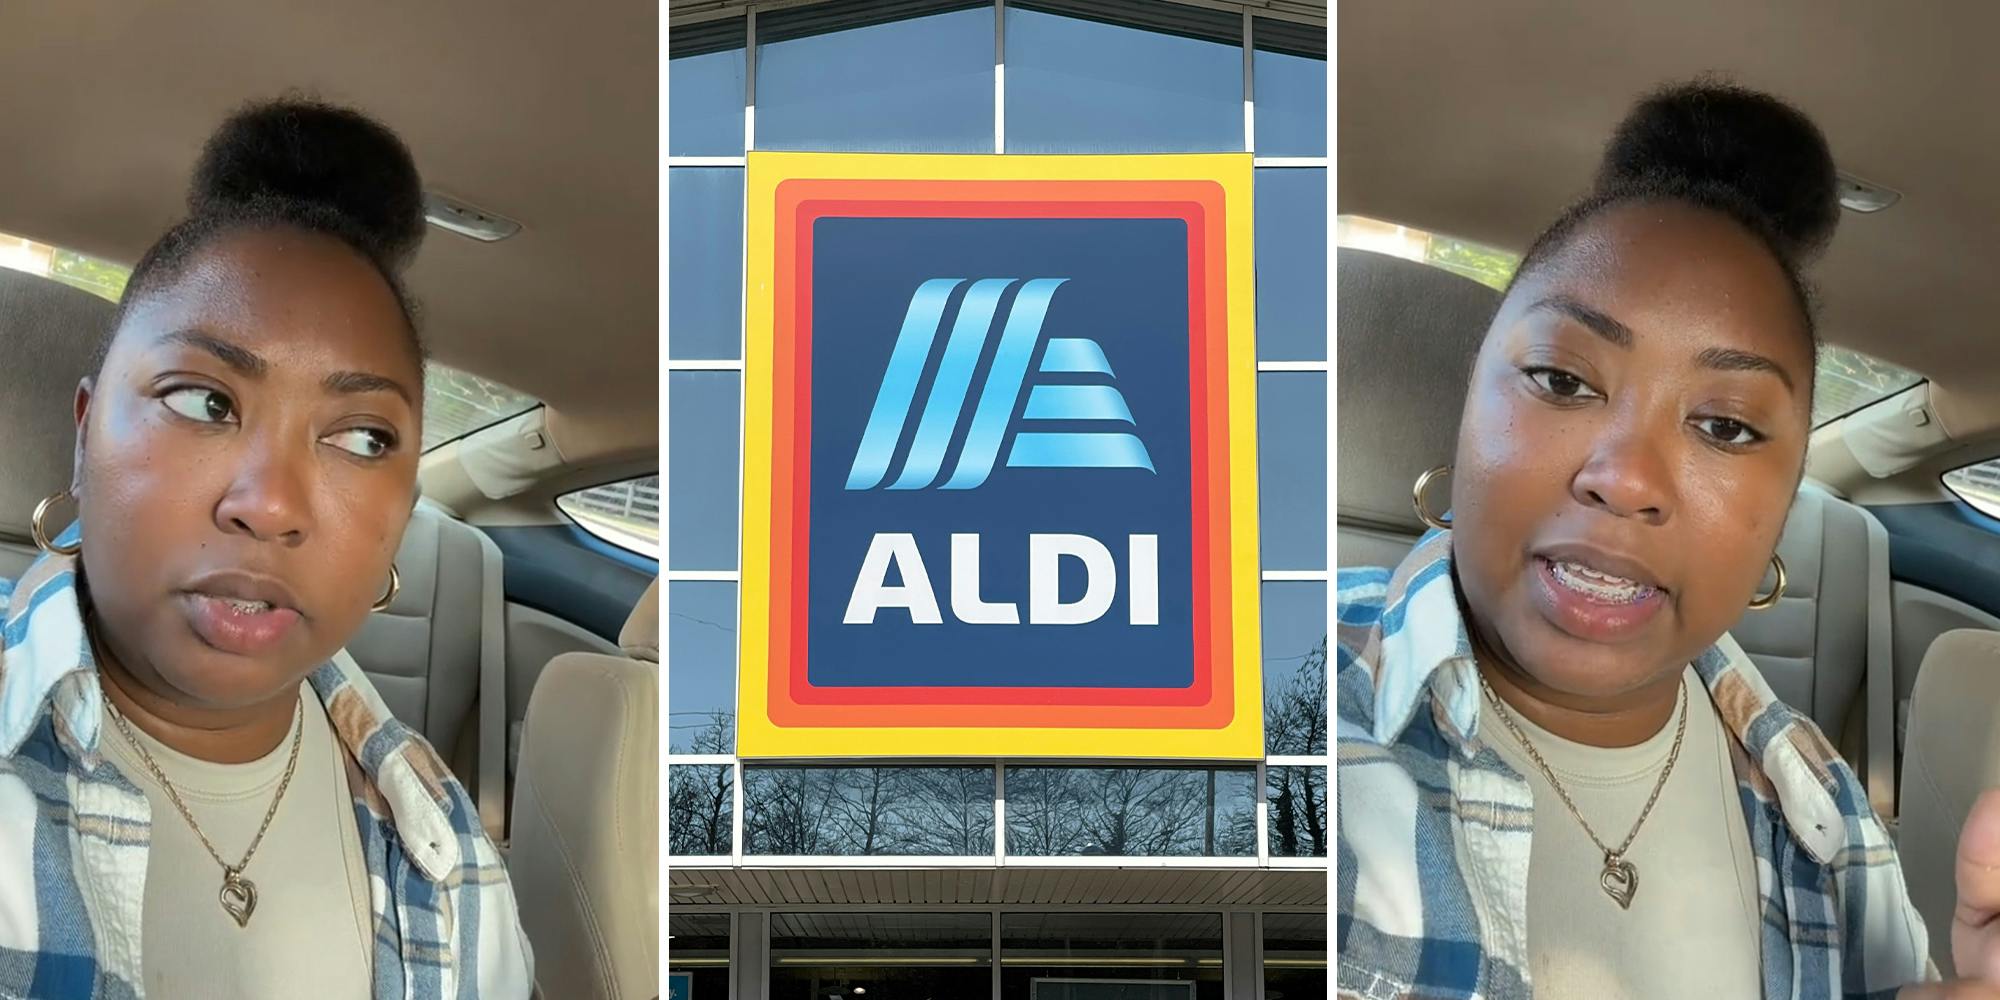 ‘Yep she was about to get that money but had to hand it over since you noticed’: Aldi customer warns of cashback button trick at checkout